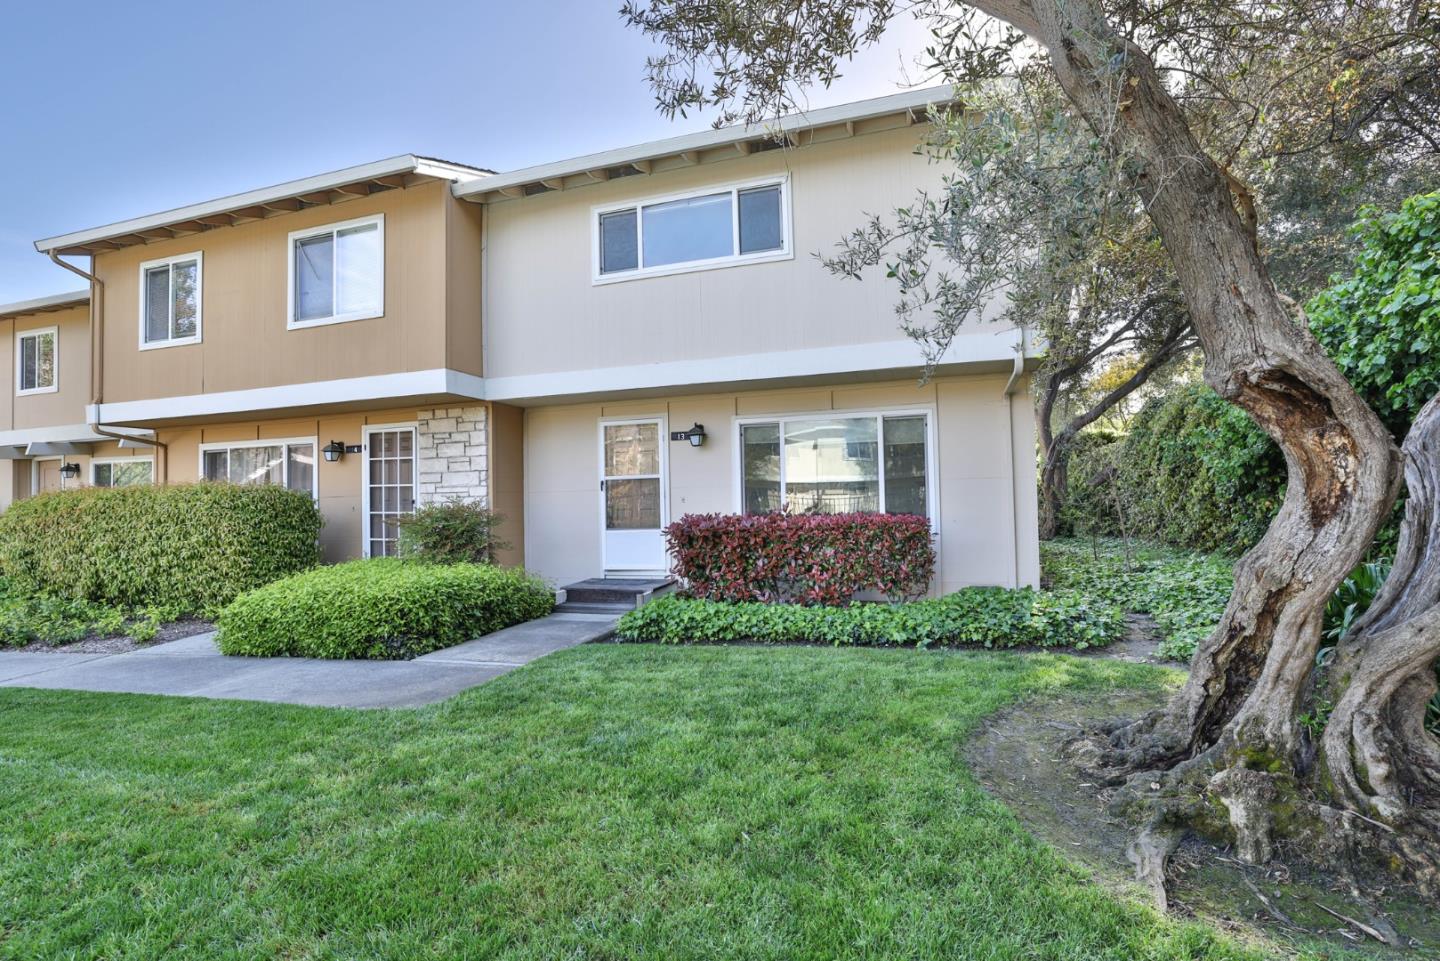 Photo of 13 Sutter Creek Ln in Mountain View, CA